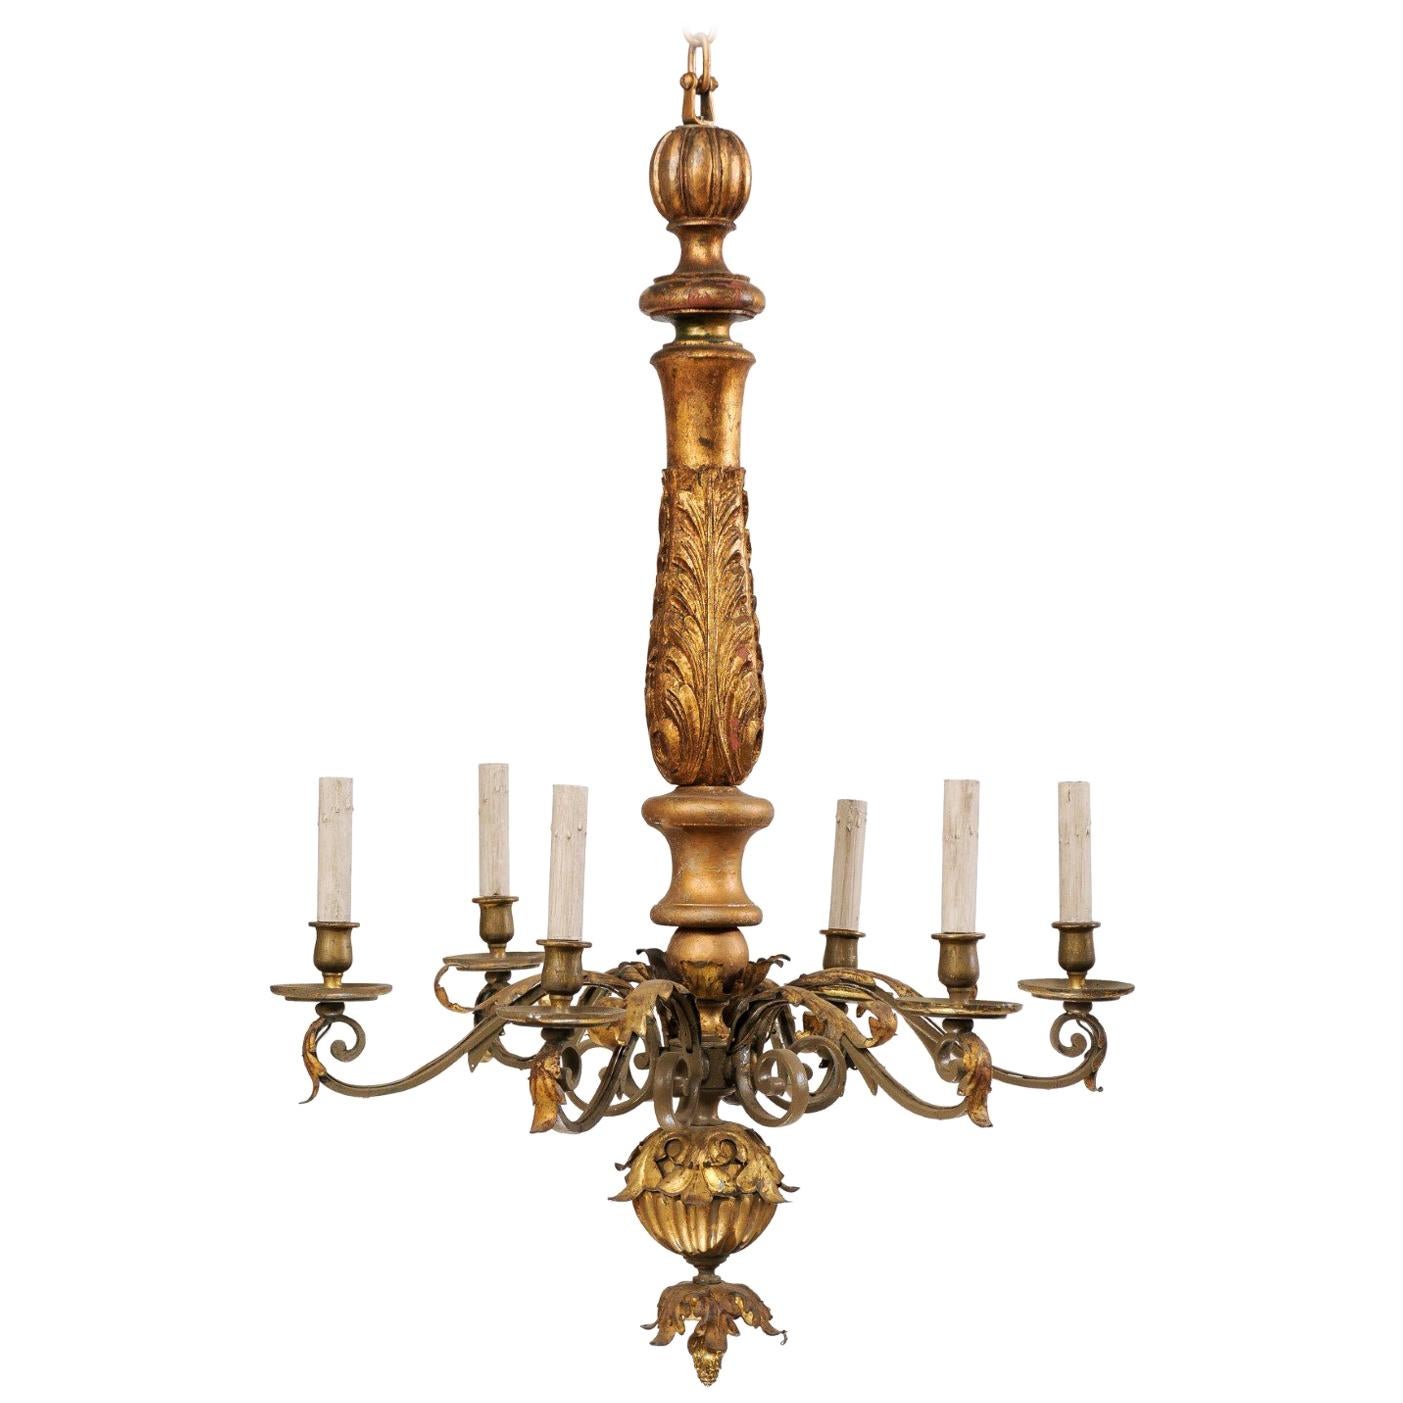 An Italian Acanthus-Carved Wood Column Chandelier w/Six Scrolled Metal Arms 